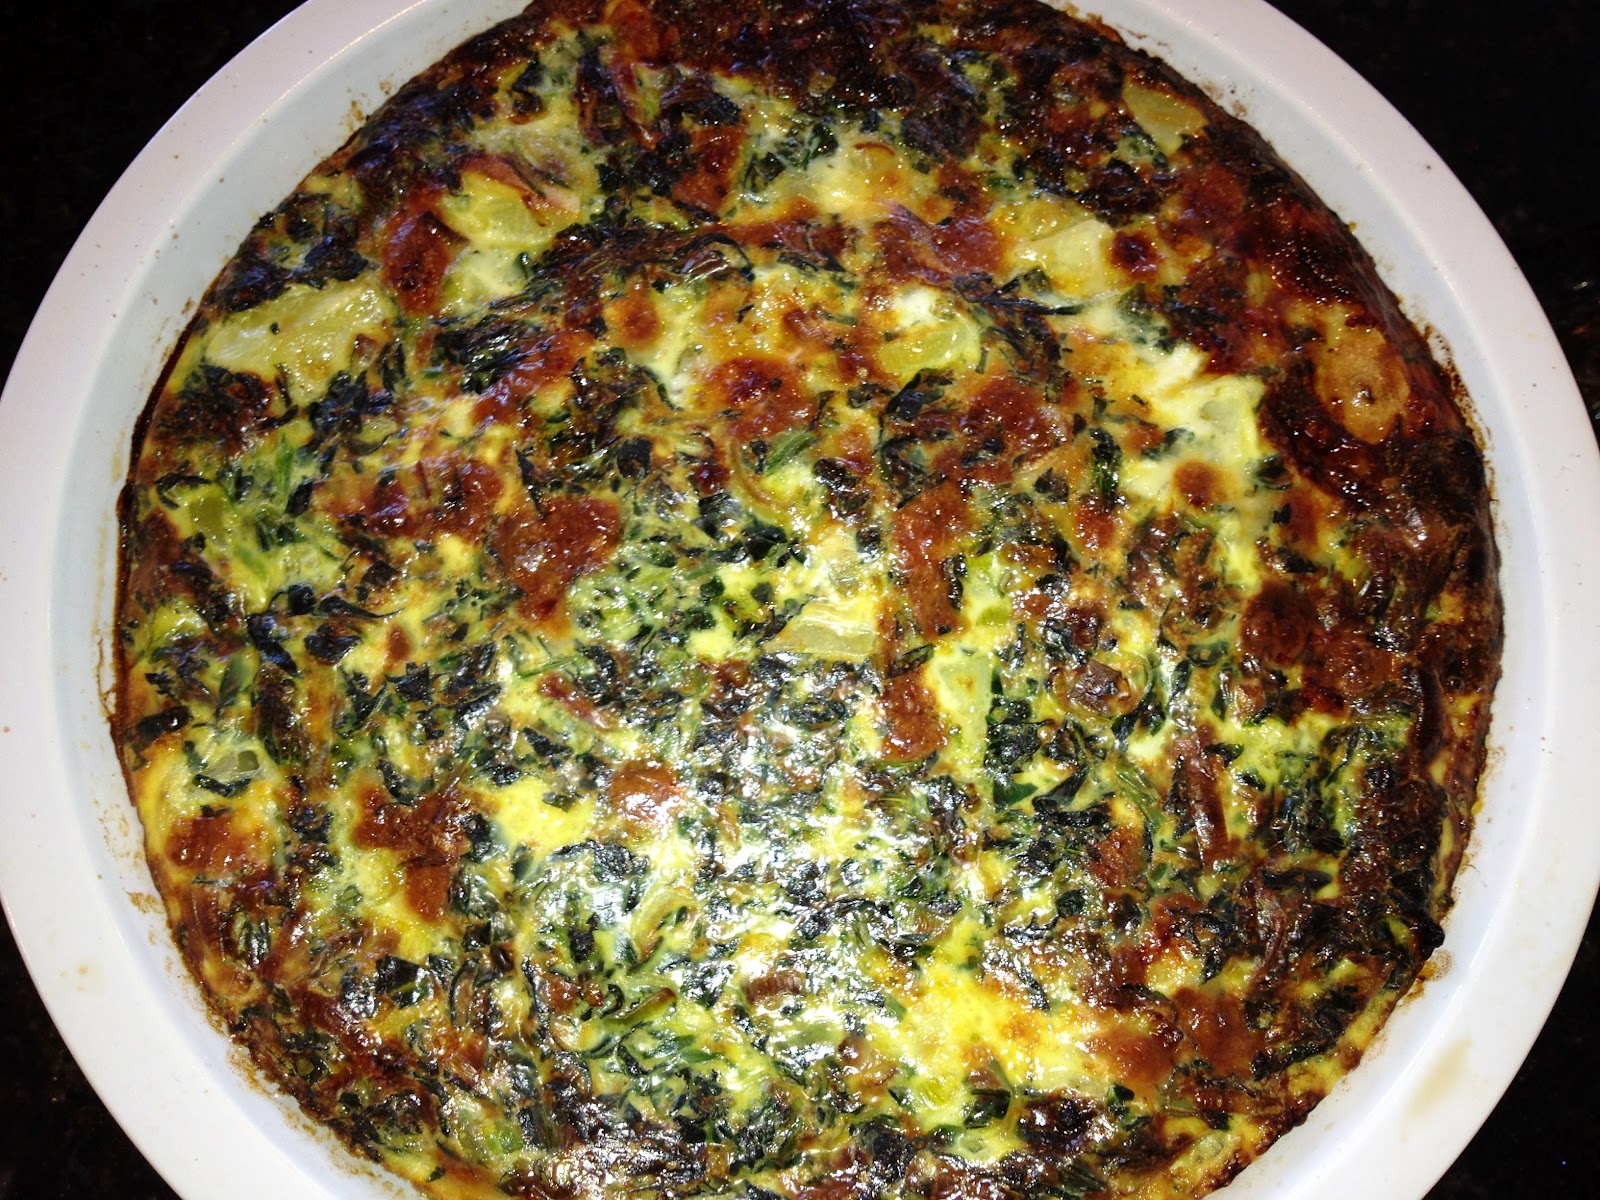 Lex's Life: Frittata with Spinach, Potatoes and Leeks